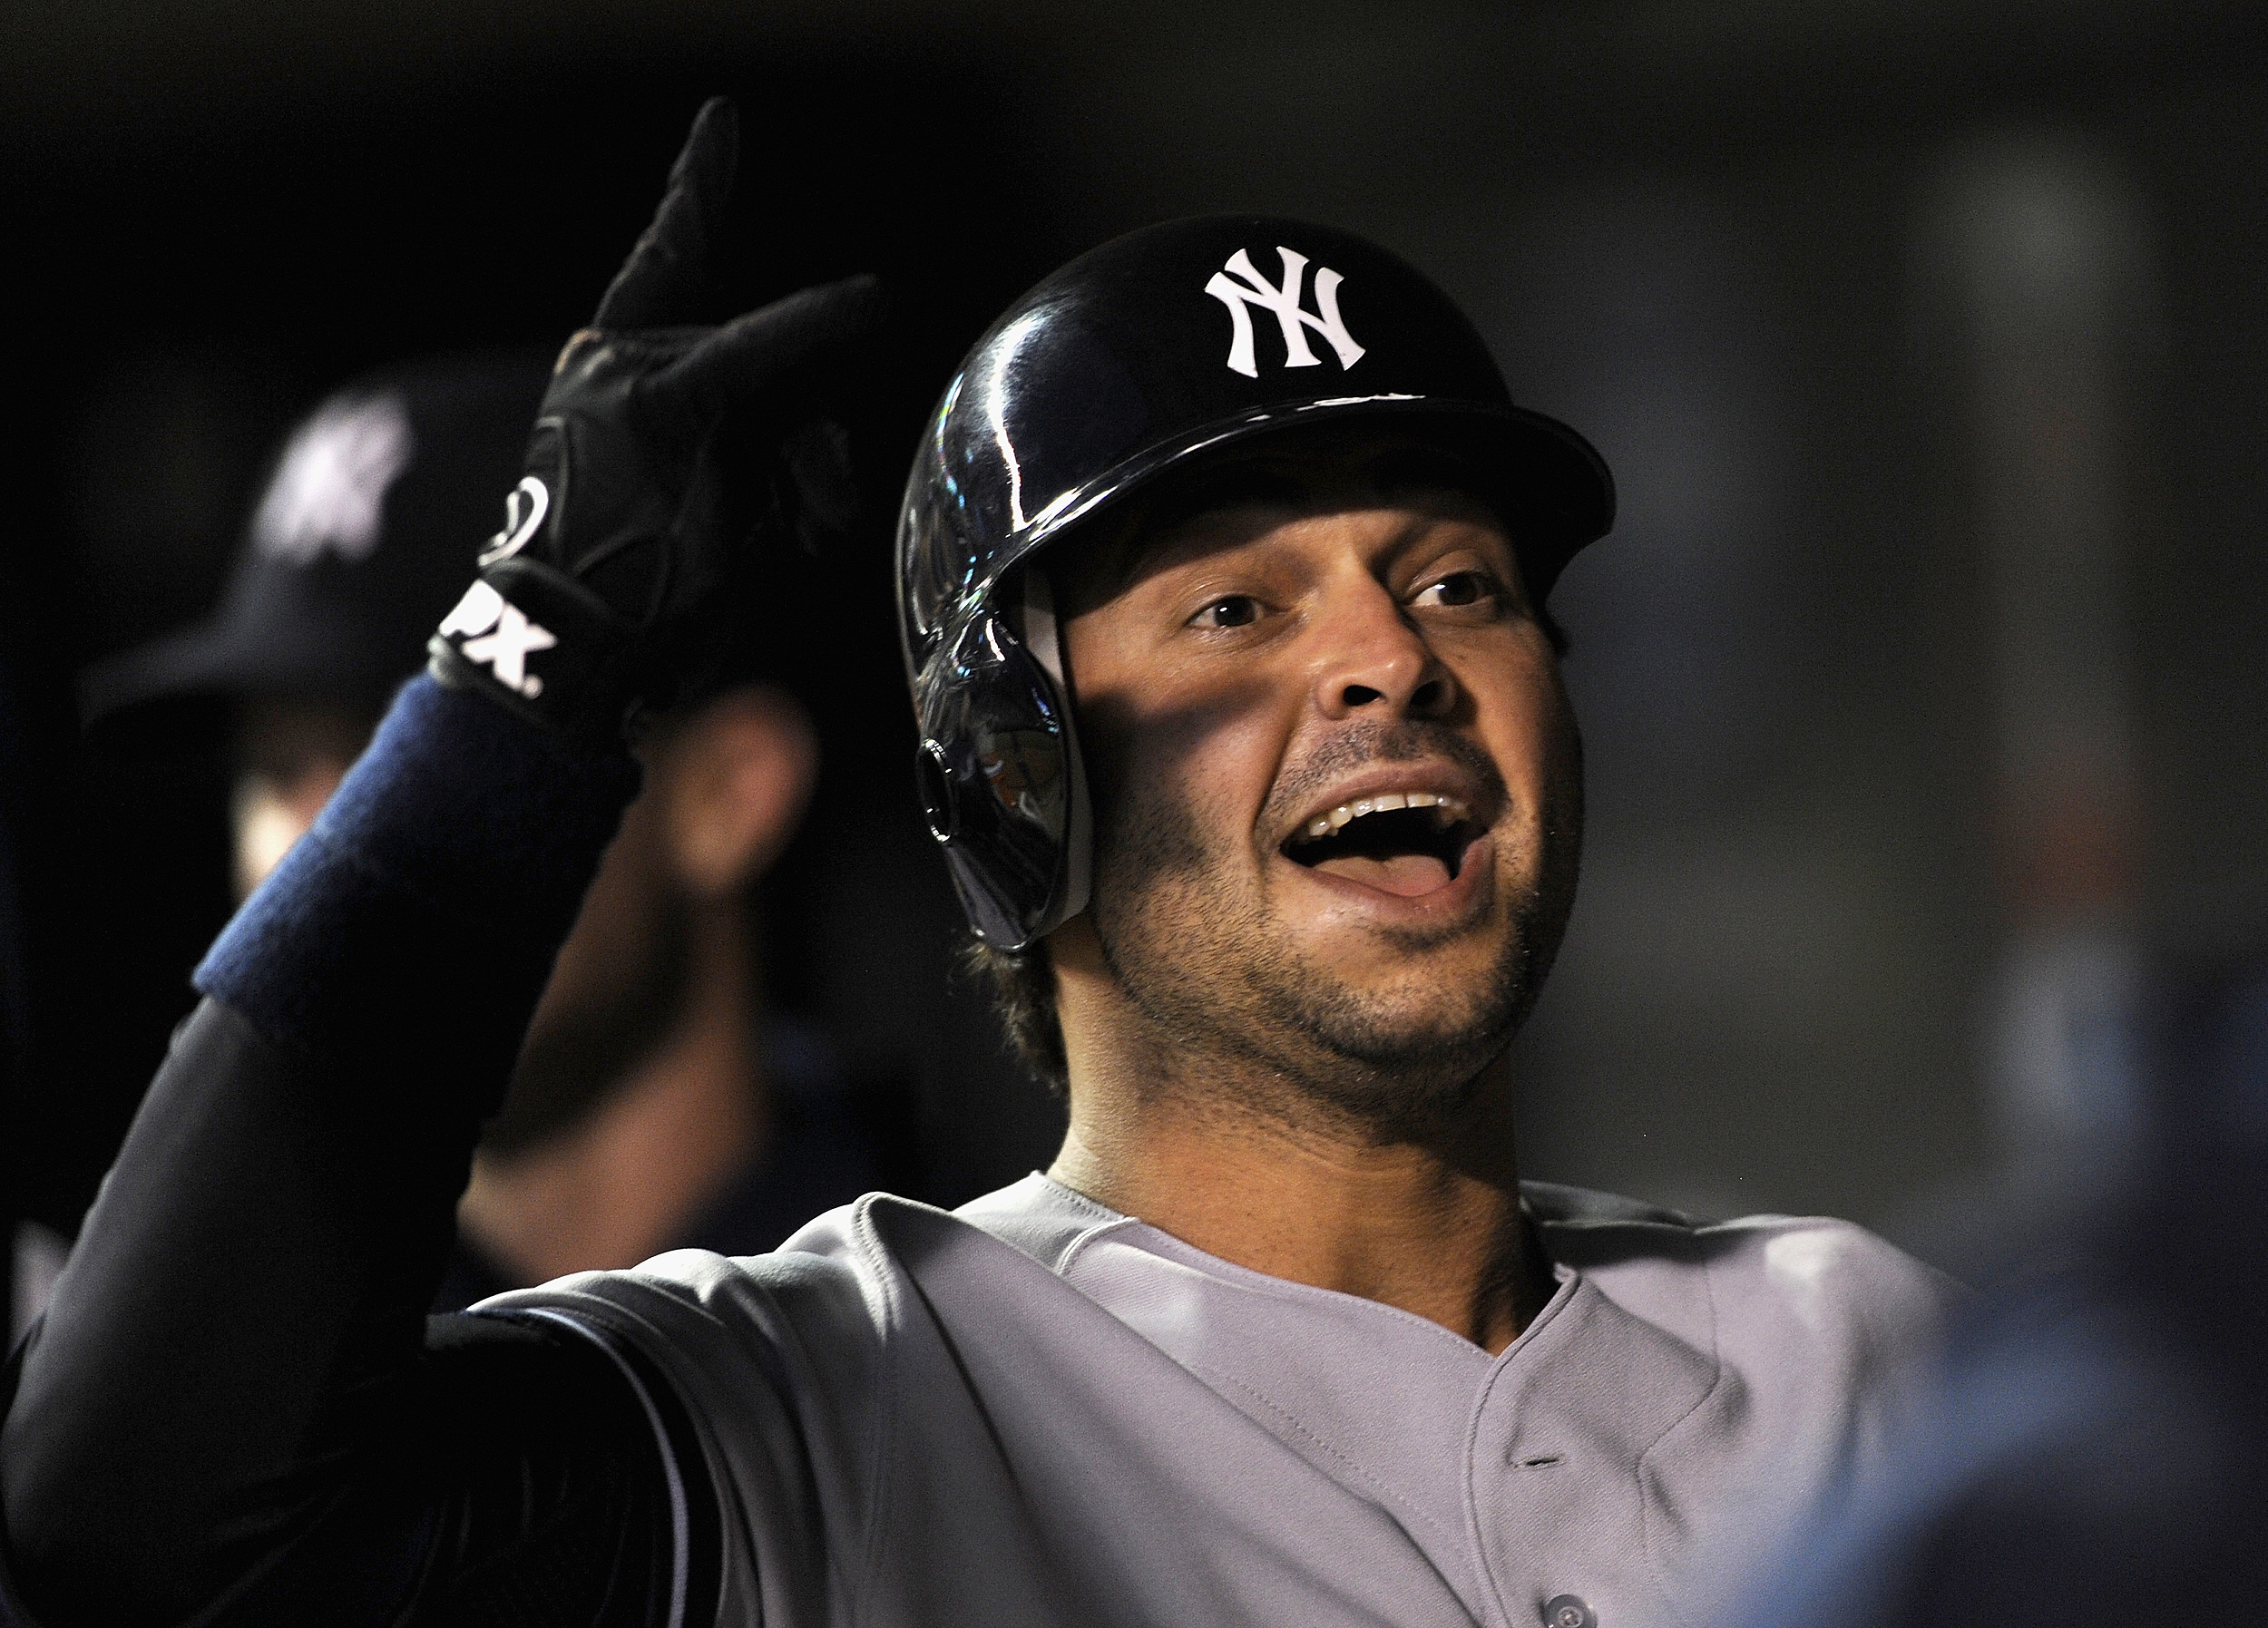 Nick Swisher expected to sign minor league deal with Yankees